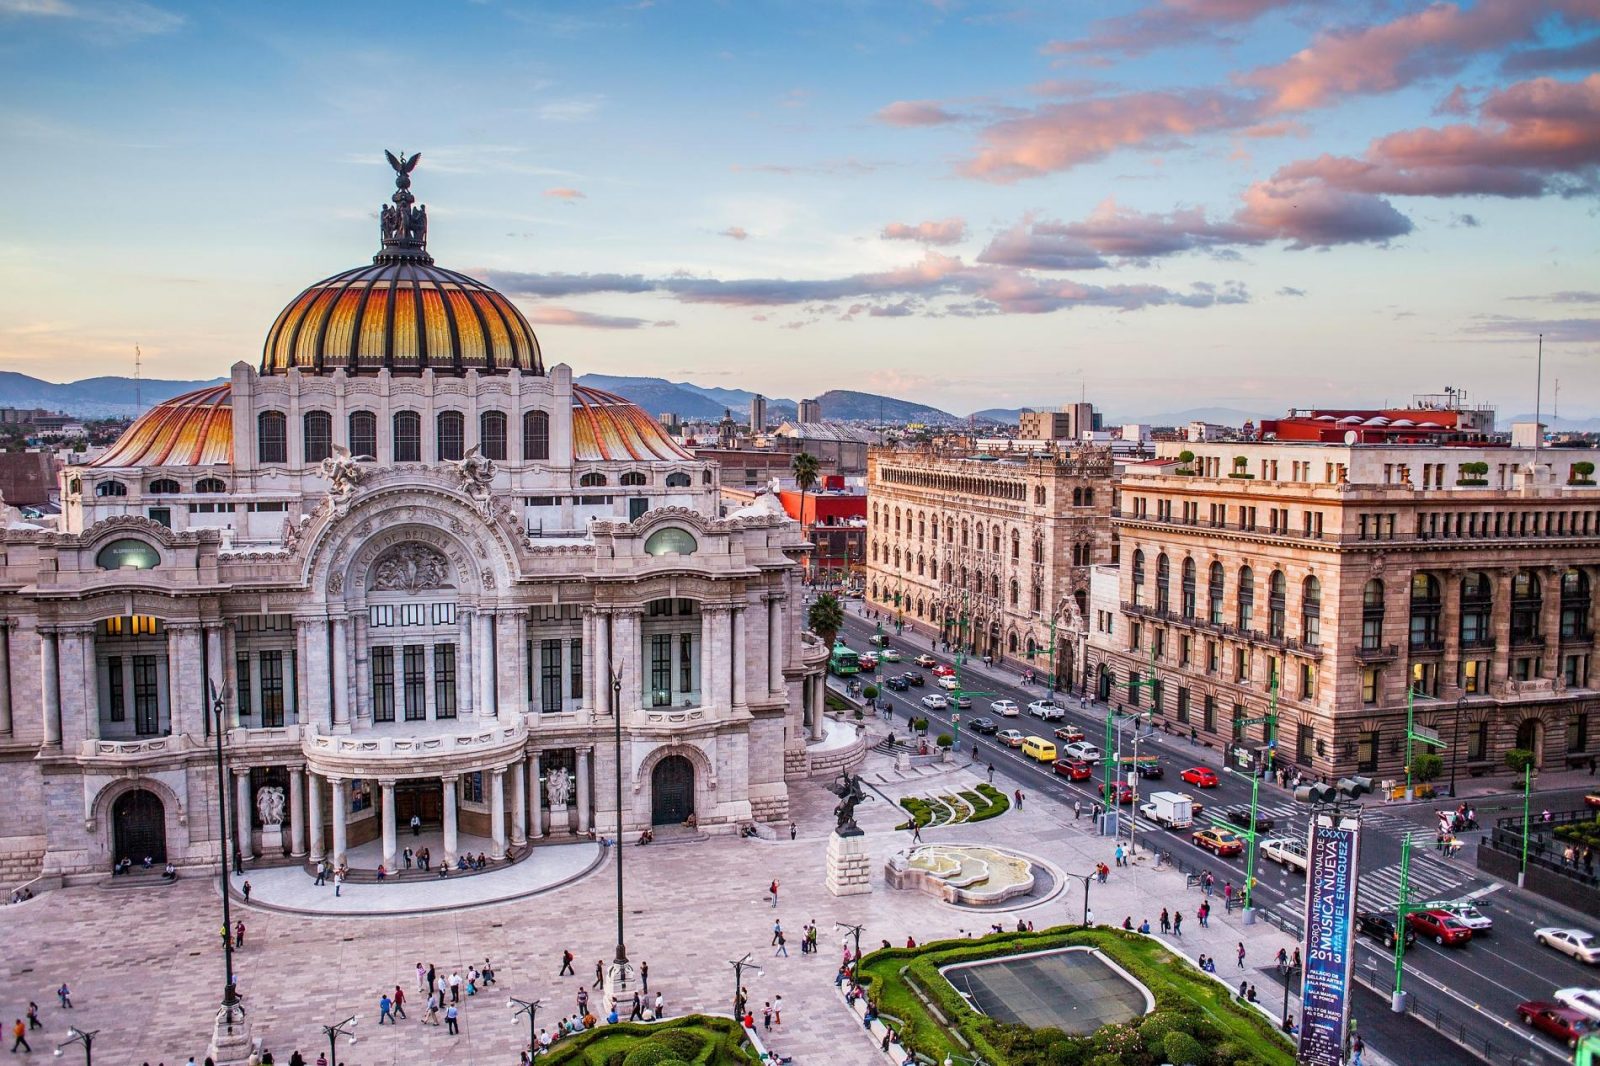 Can You Answer All 20 of These Super Easy Trivia Questions Correctly? Mexico City